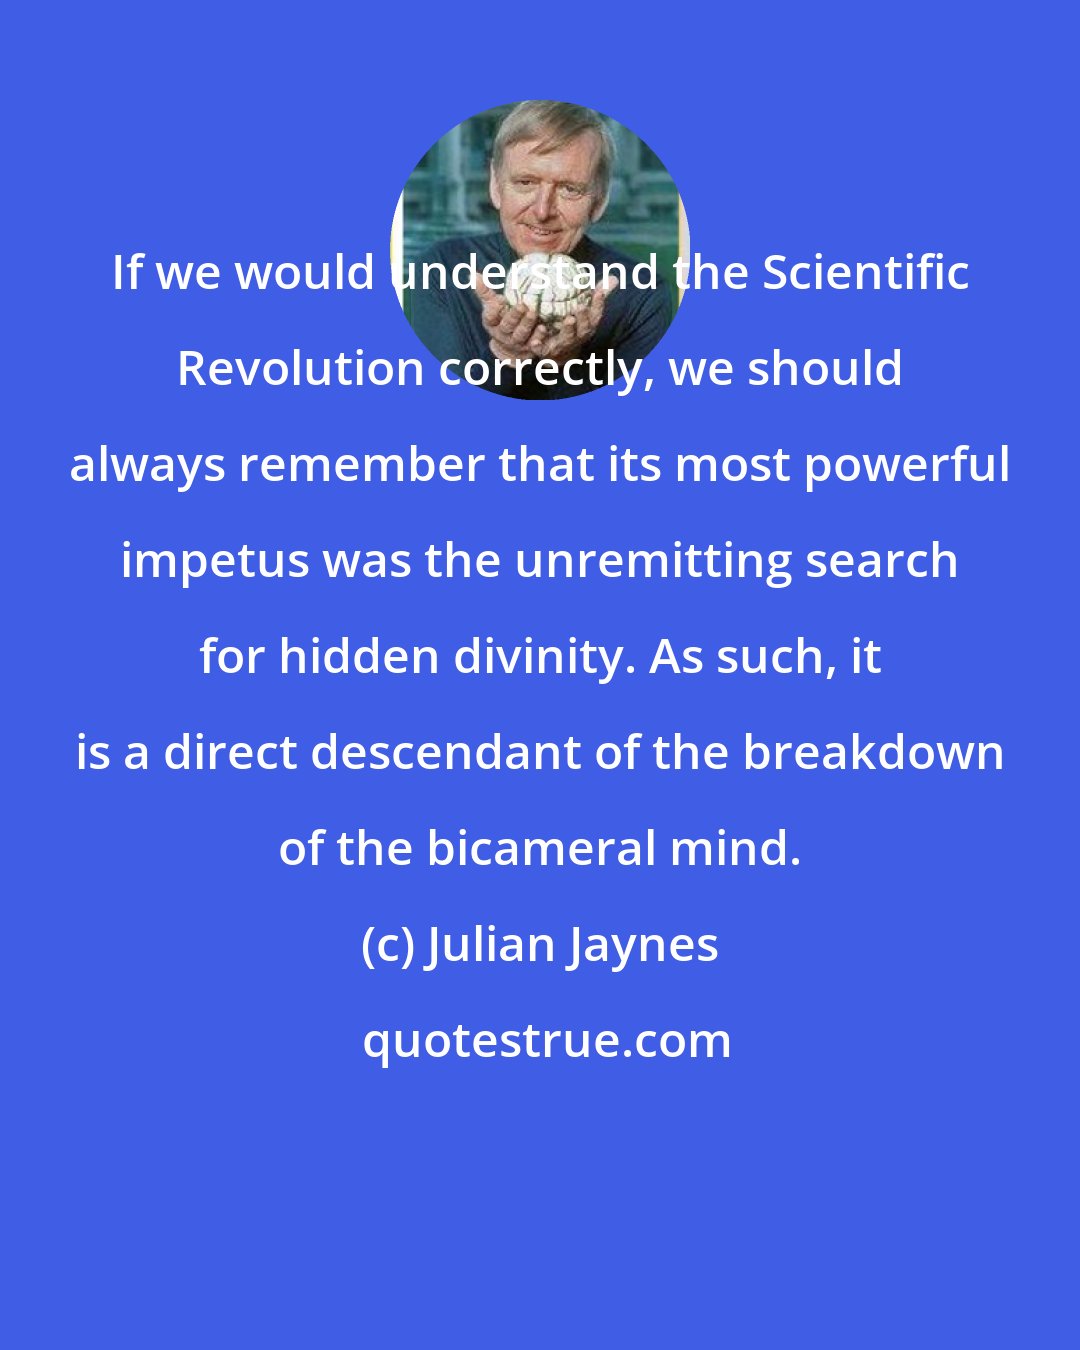 Julian Jaynes: If we would understand the Scientific Revolution correctly, we should always remember that its most powerful impetus was the unremitting search for hidden divinity. As such, it is a direct descendant of the breakdown of the bicameral mind.